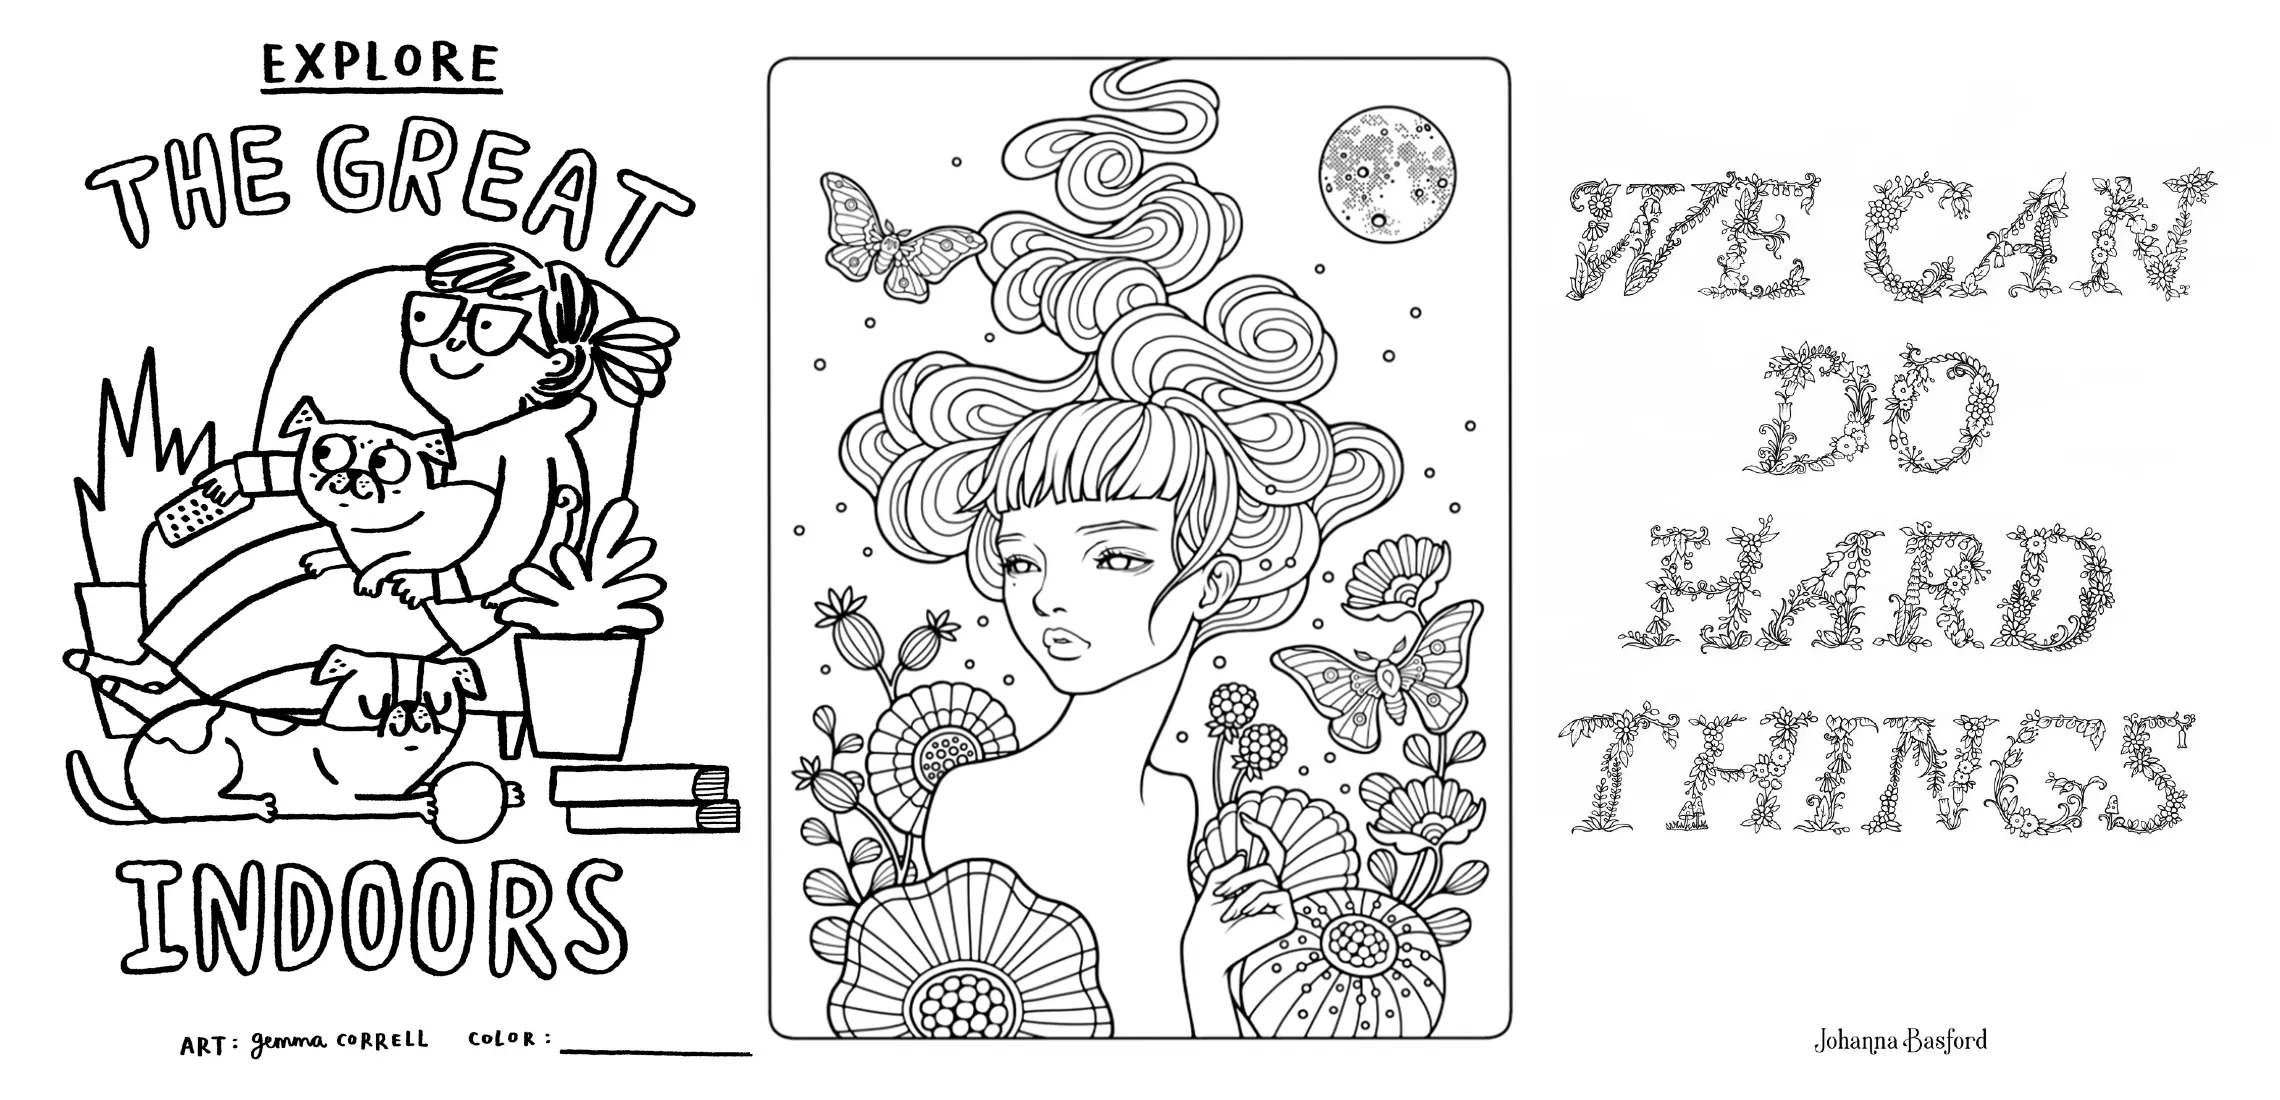 Free-Colouring-Pages-Header.jpg